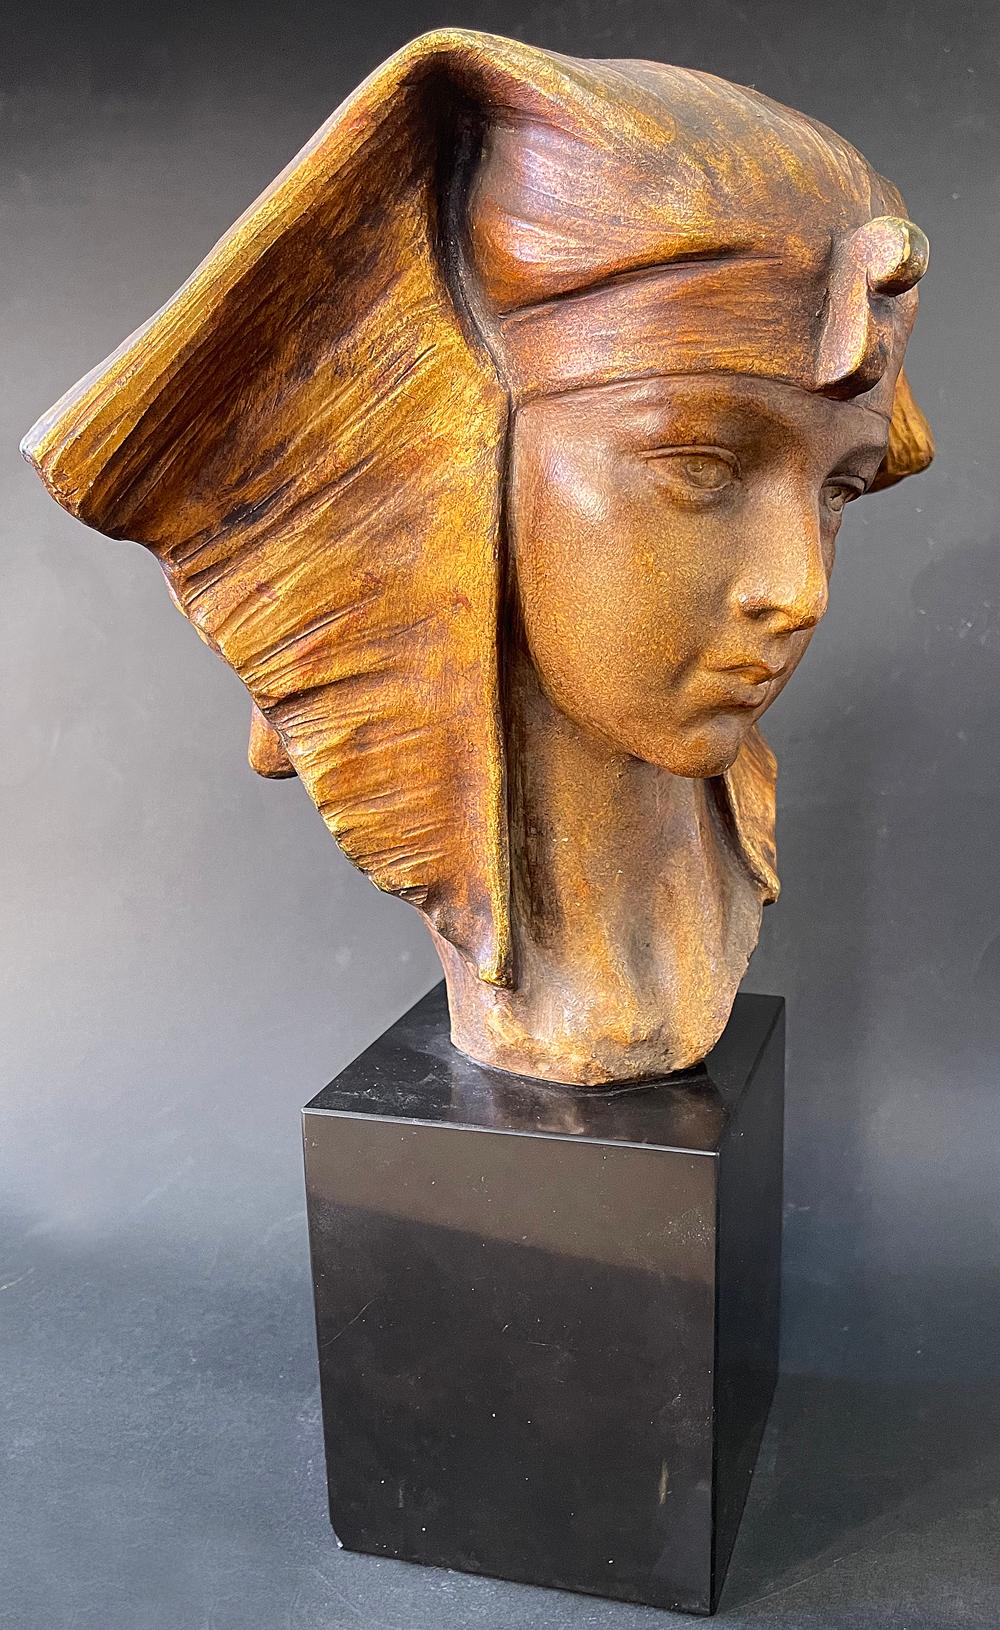 Extremely rare and breathtaking, this gilded Art Deco terracotta sculpture depicts Cleopatra as a young woman with beautiful, fine features and a thoughtful, pensive appearance, crowned with a headdress that flares to either side of her head and is